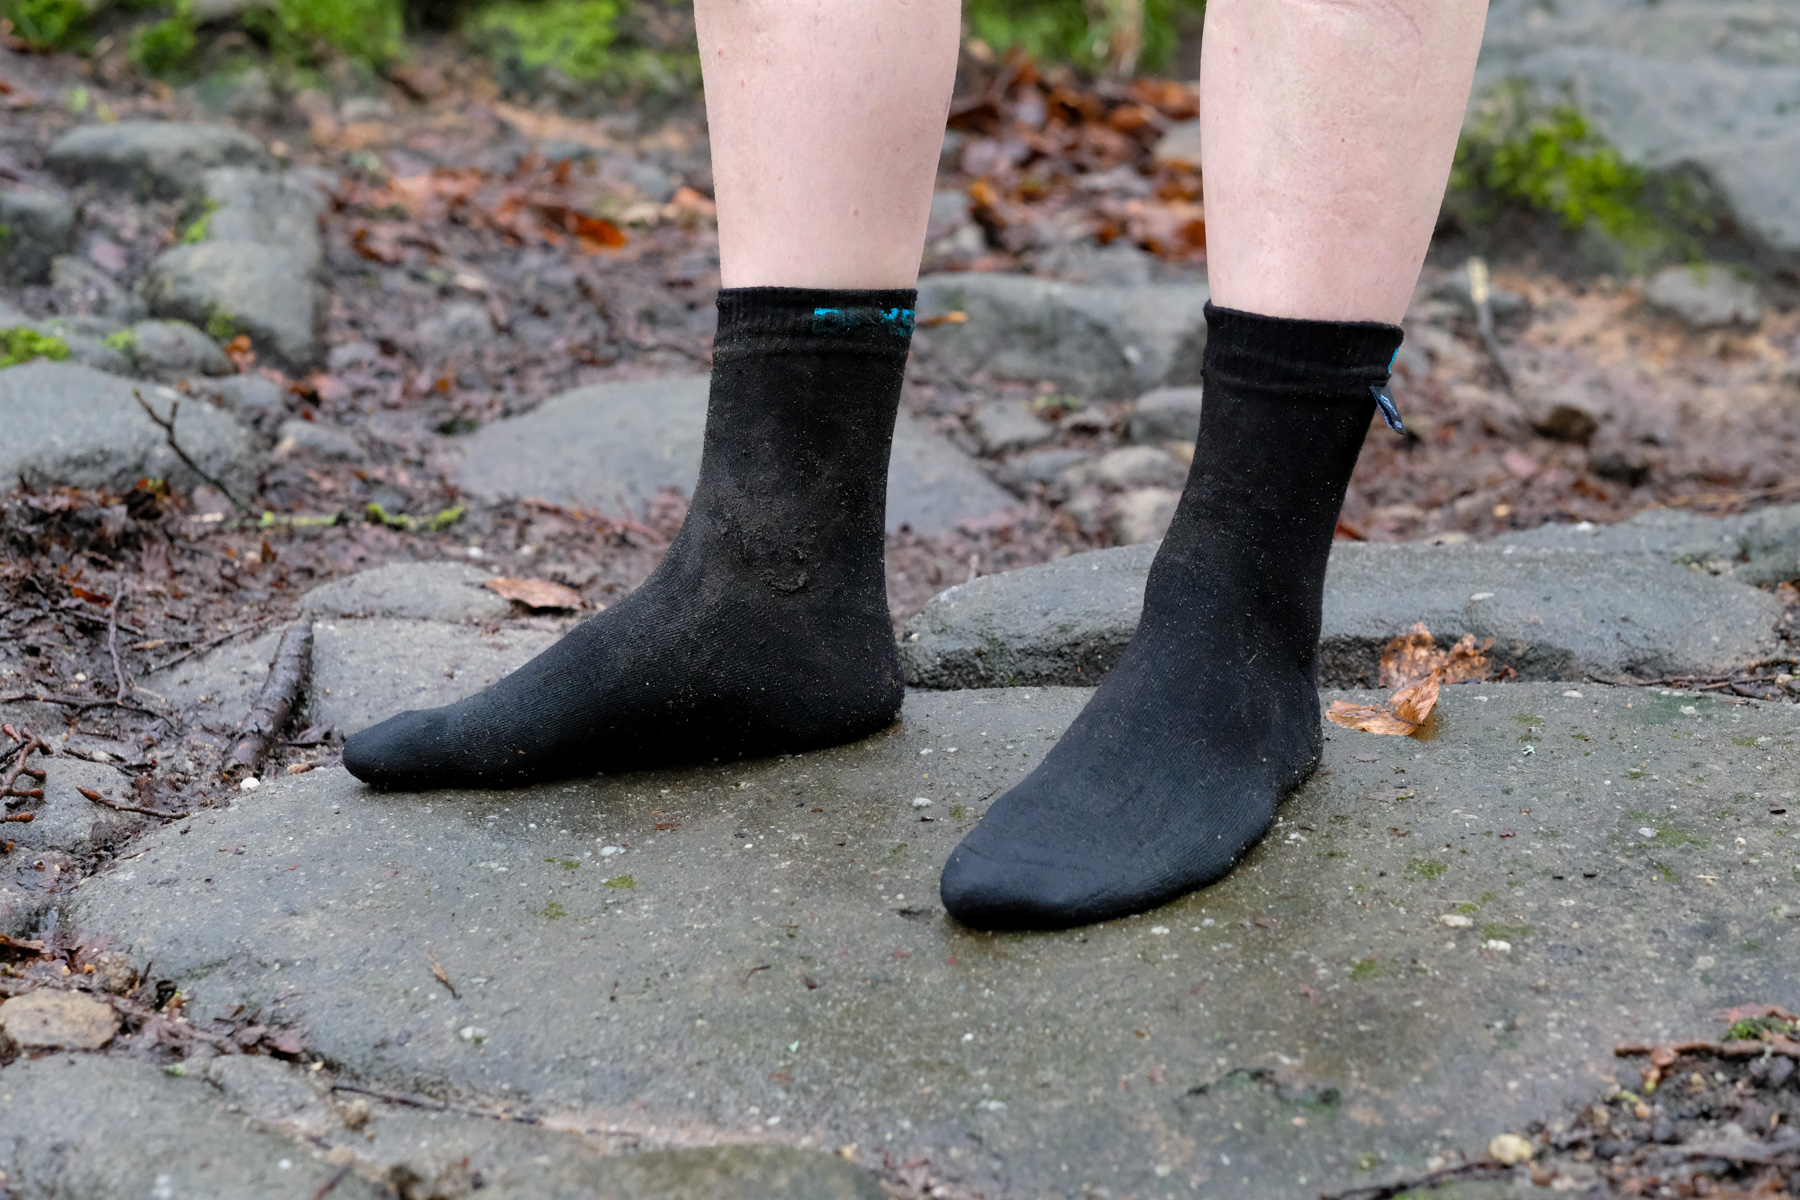 DexShell Ultra Thin Crew Socks - Calcetines impermeables